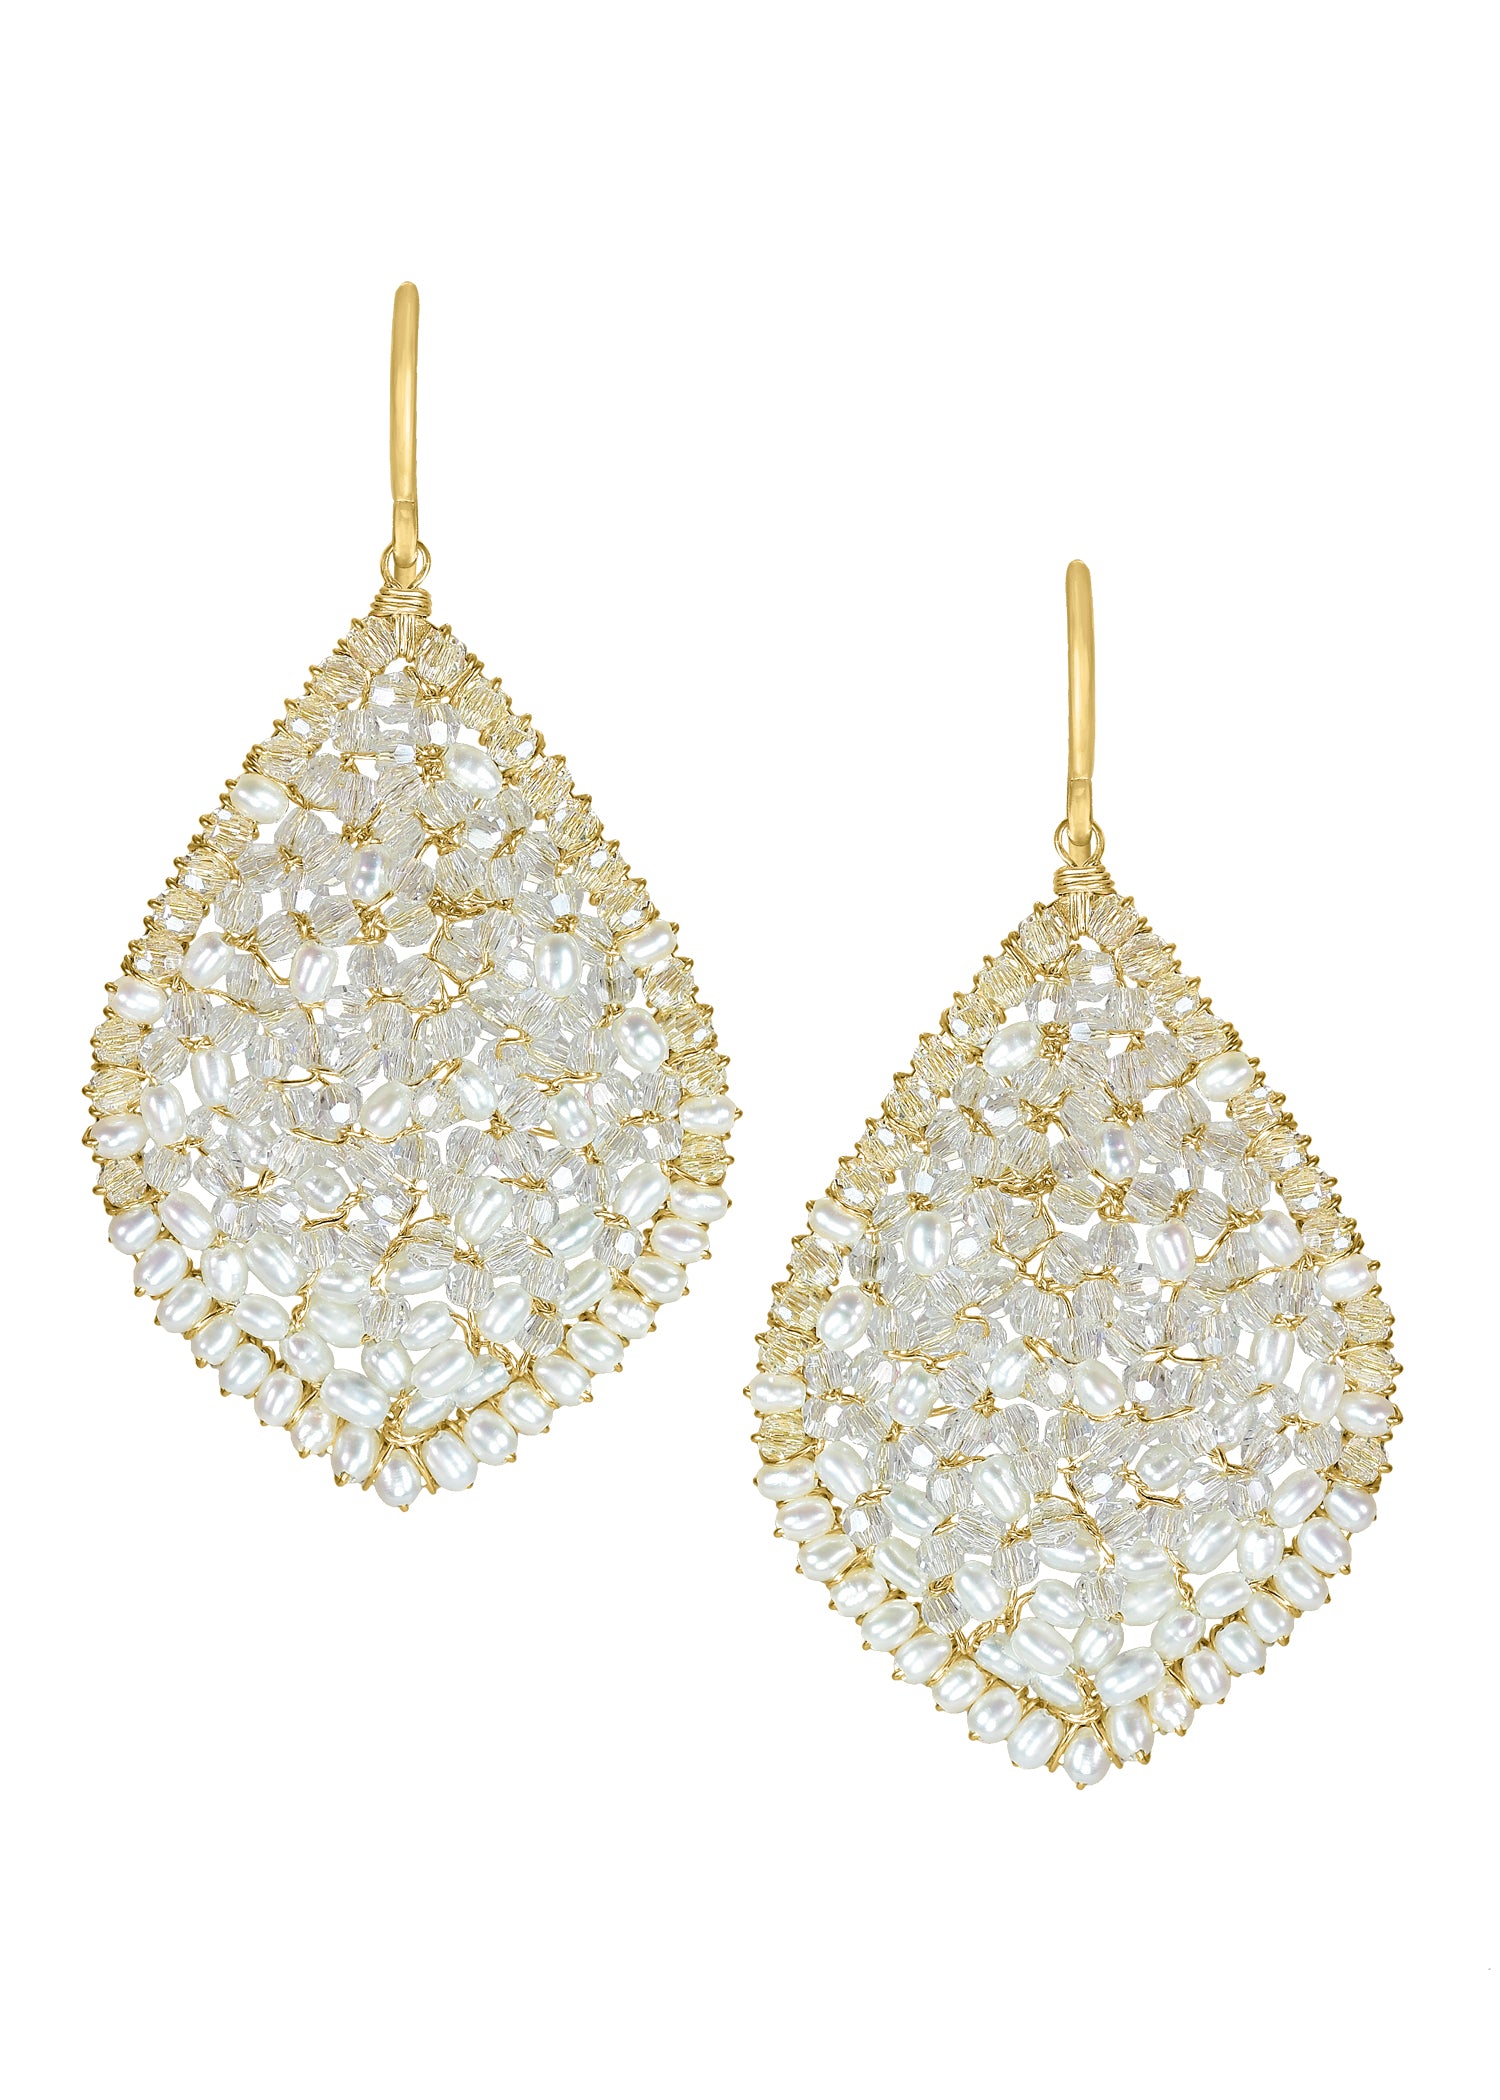 Crystal Freshwater pearl 14k gold fill Earrings measure 1-3/4" in length (including ear wires) and 1" in width at the widest point Handmade in our Los Angeles studio